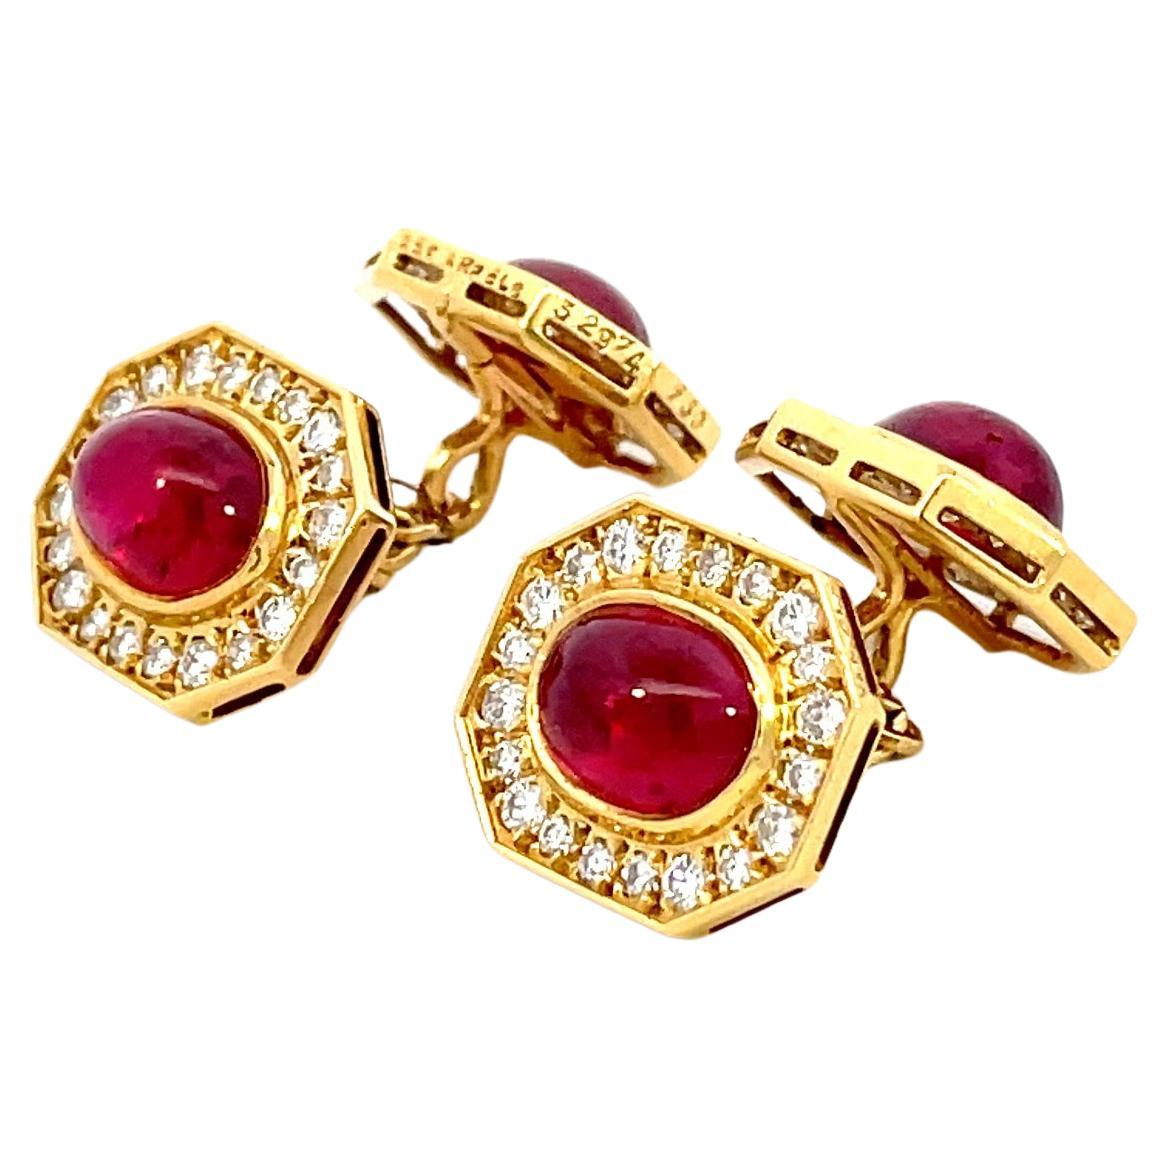 A stunning pair of cufflinks by Van Cleef and Arpels.
4 Bright and gem Quality cabochon cut VIVID-RED rubies (about 2 cts each stone) surrounded by diamond pave (D-E-F color) settled in 18kt yellow gold.
Signed and numbered Van Cleef and Arpels ,